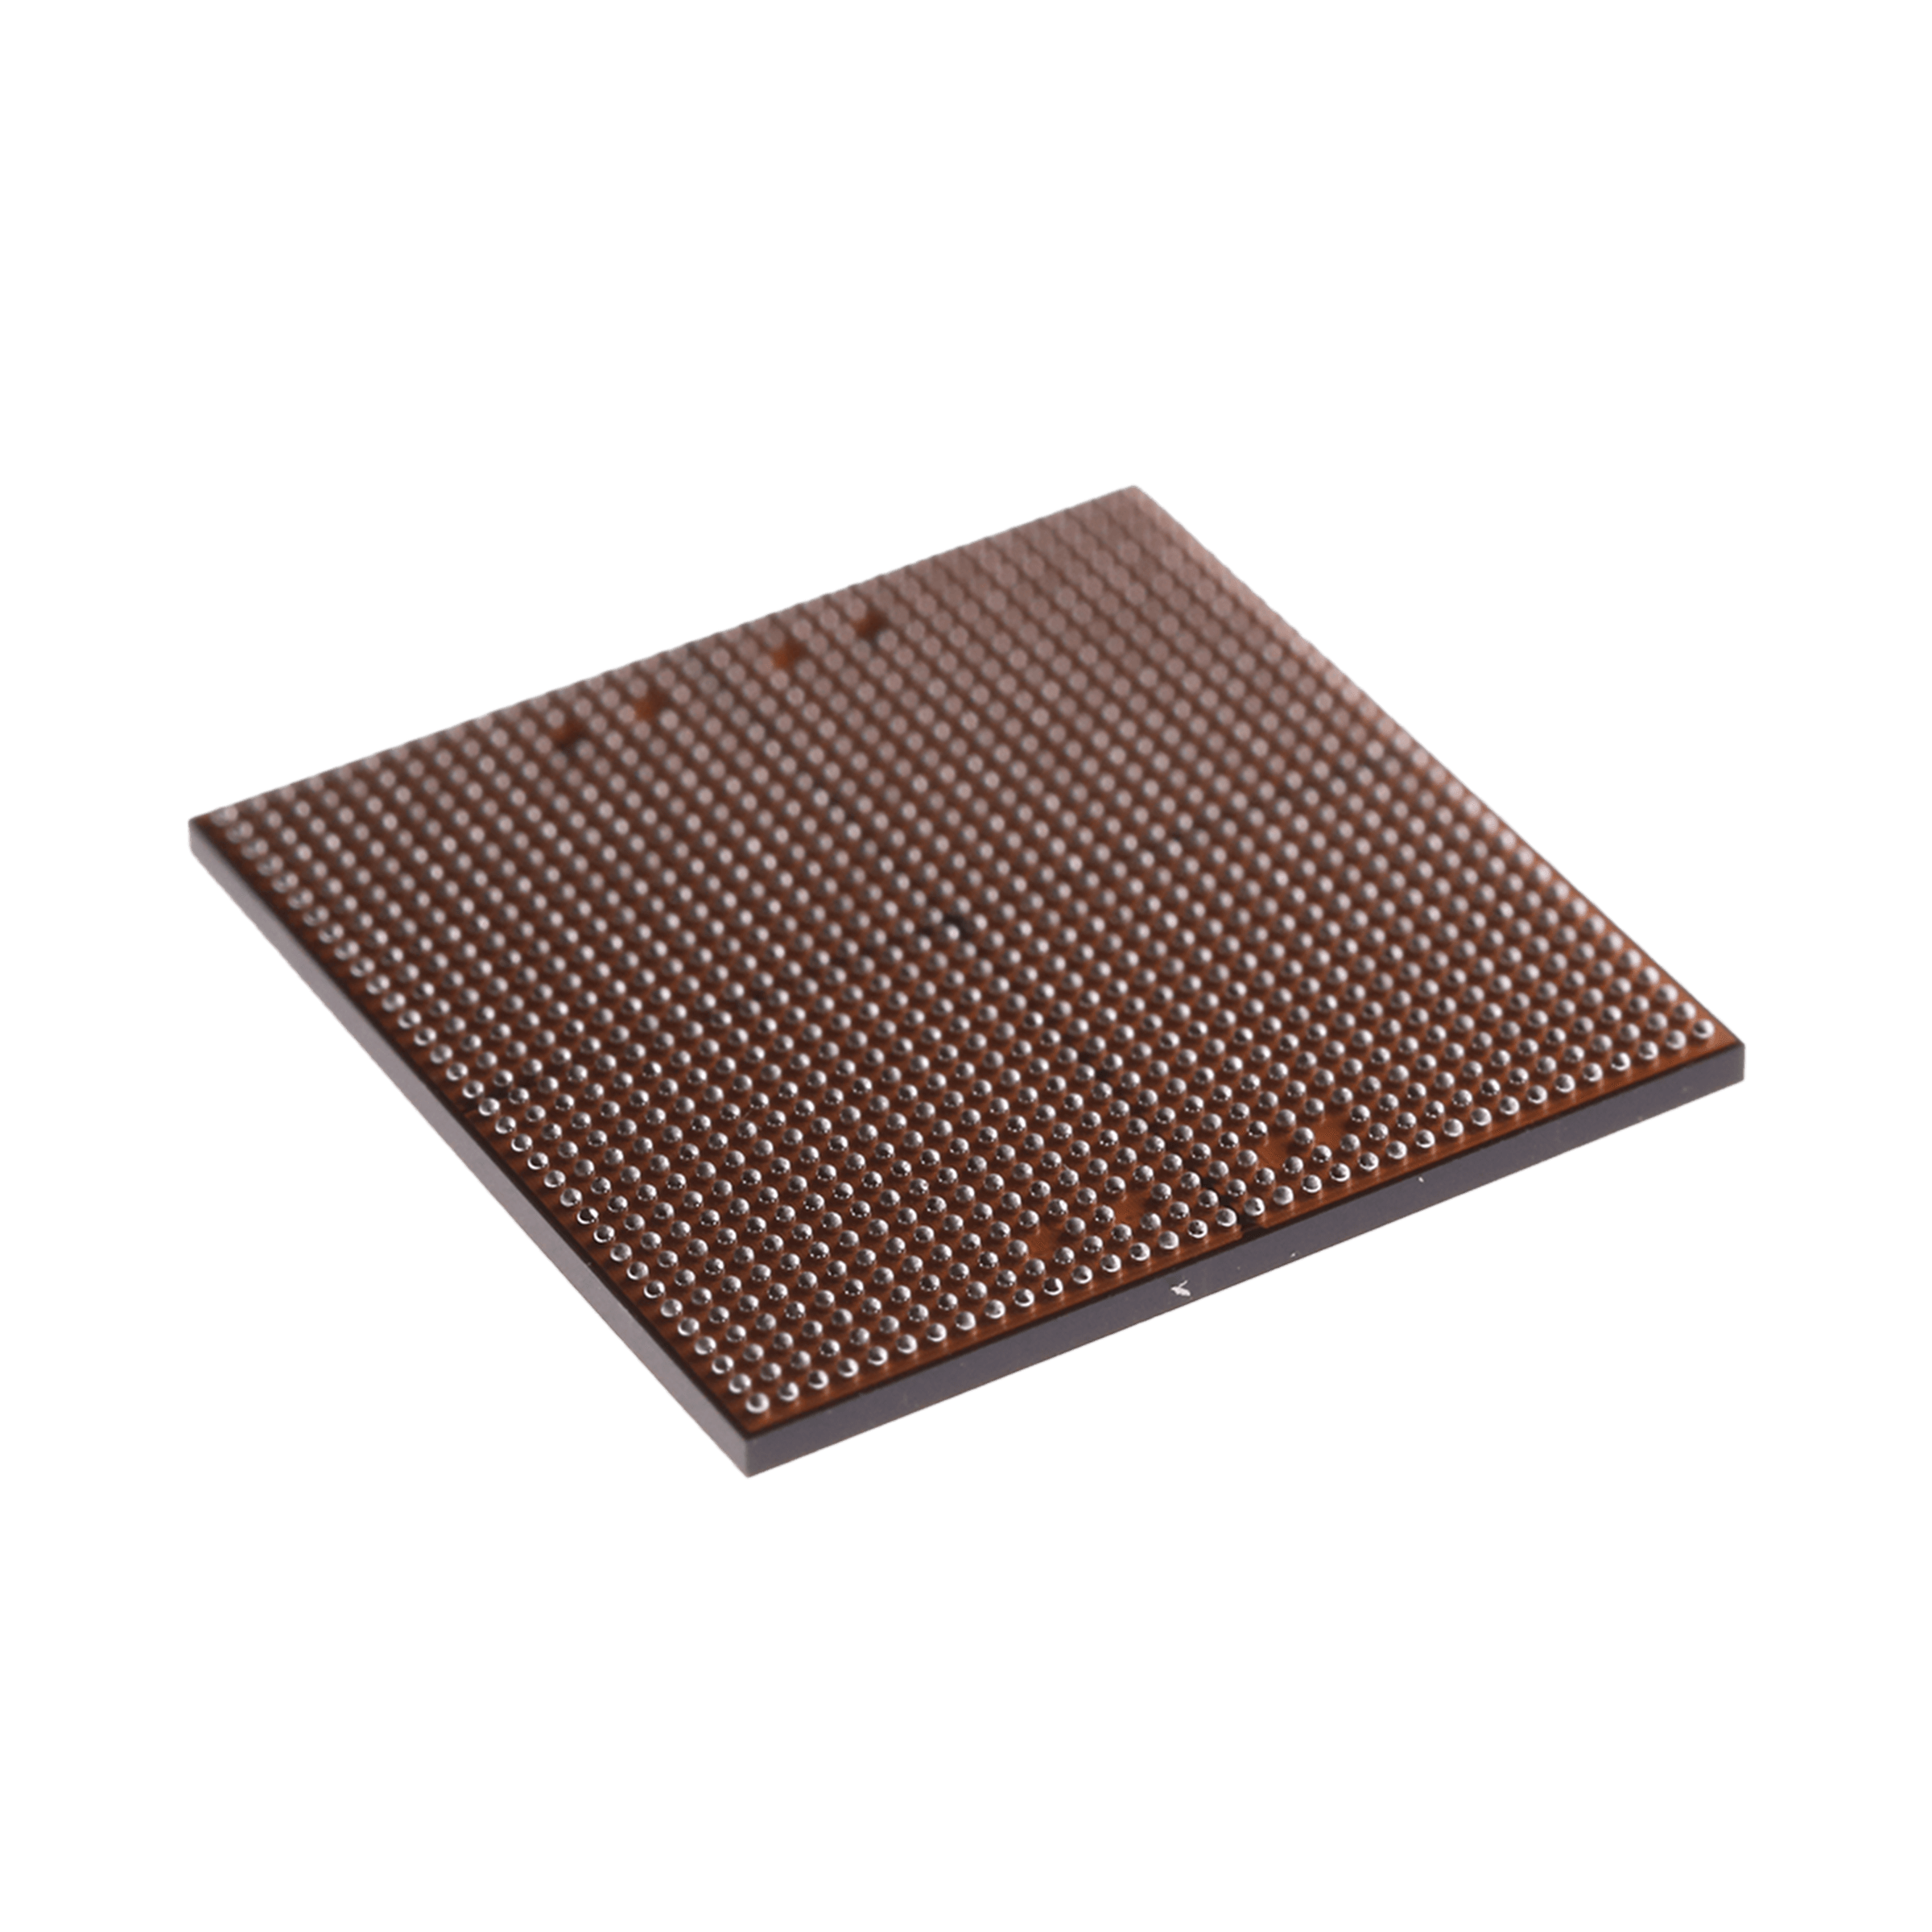 Deca Technology, Deca is the leading independent provider of advanced packaging technology to the semiconductor industry. Our M-Series™ technology is the industry’s highest volume fan-out, powering the world’s smartphones. 